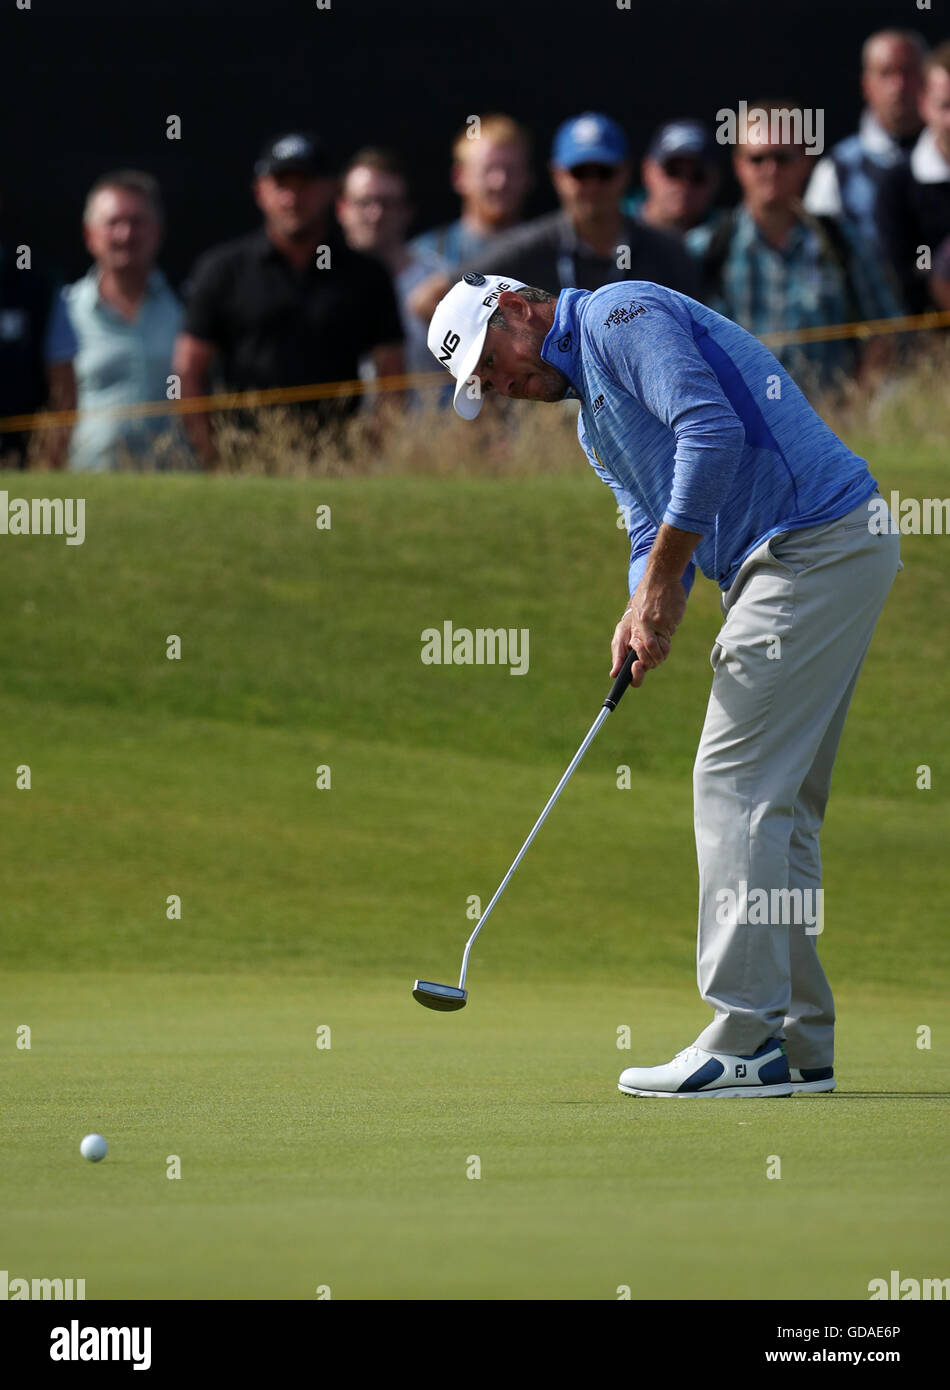 Englands Lee Westwood bei Tag eins von The Open Championship 2016 im Royal Troon Golf Club, South Ayrshire. Stockfoto